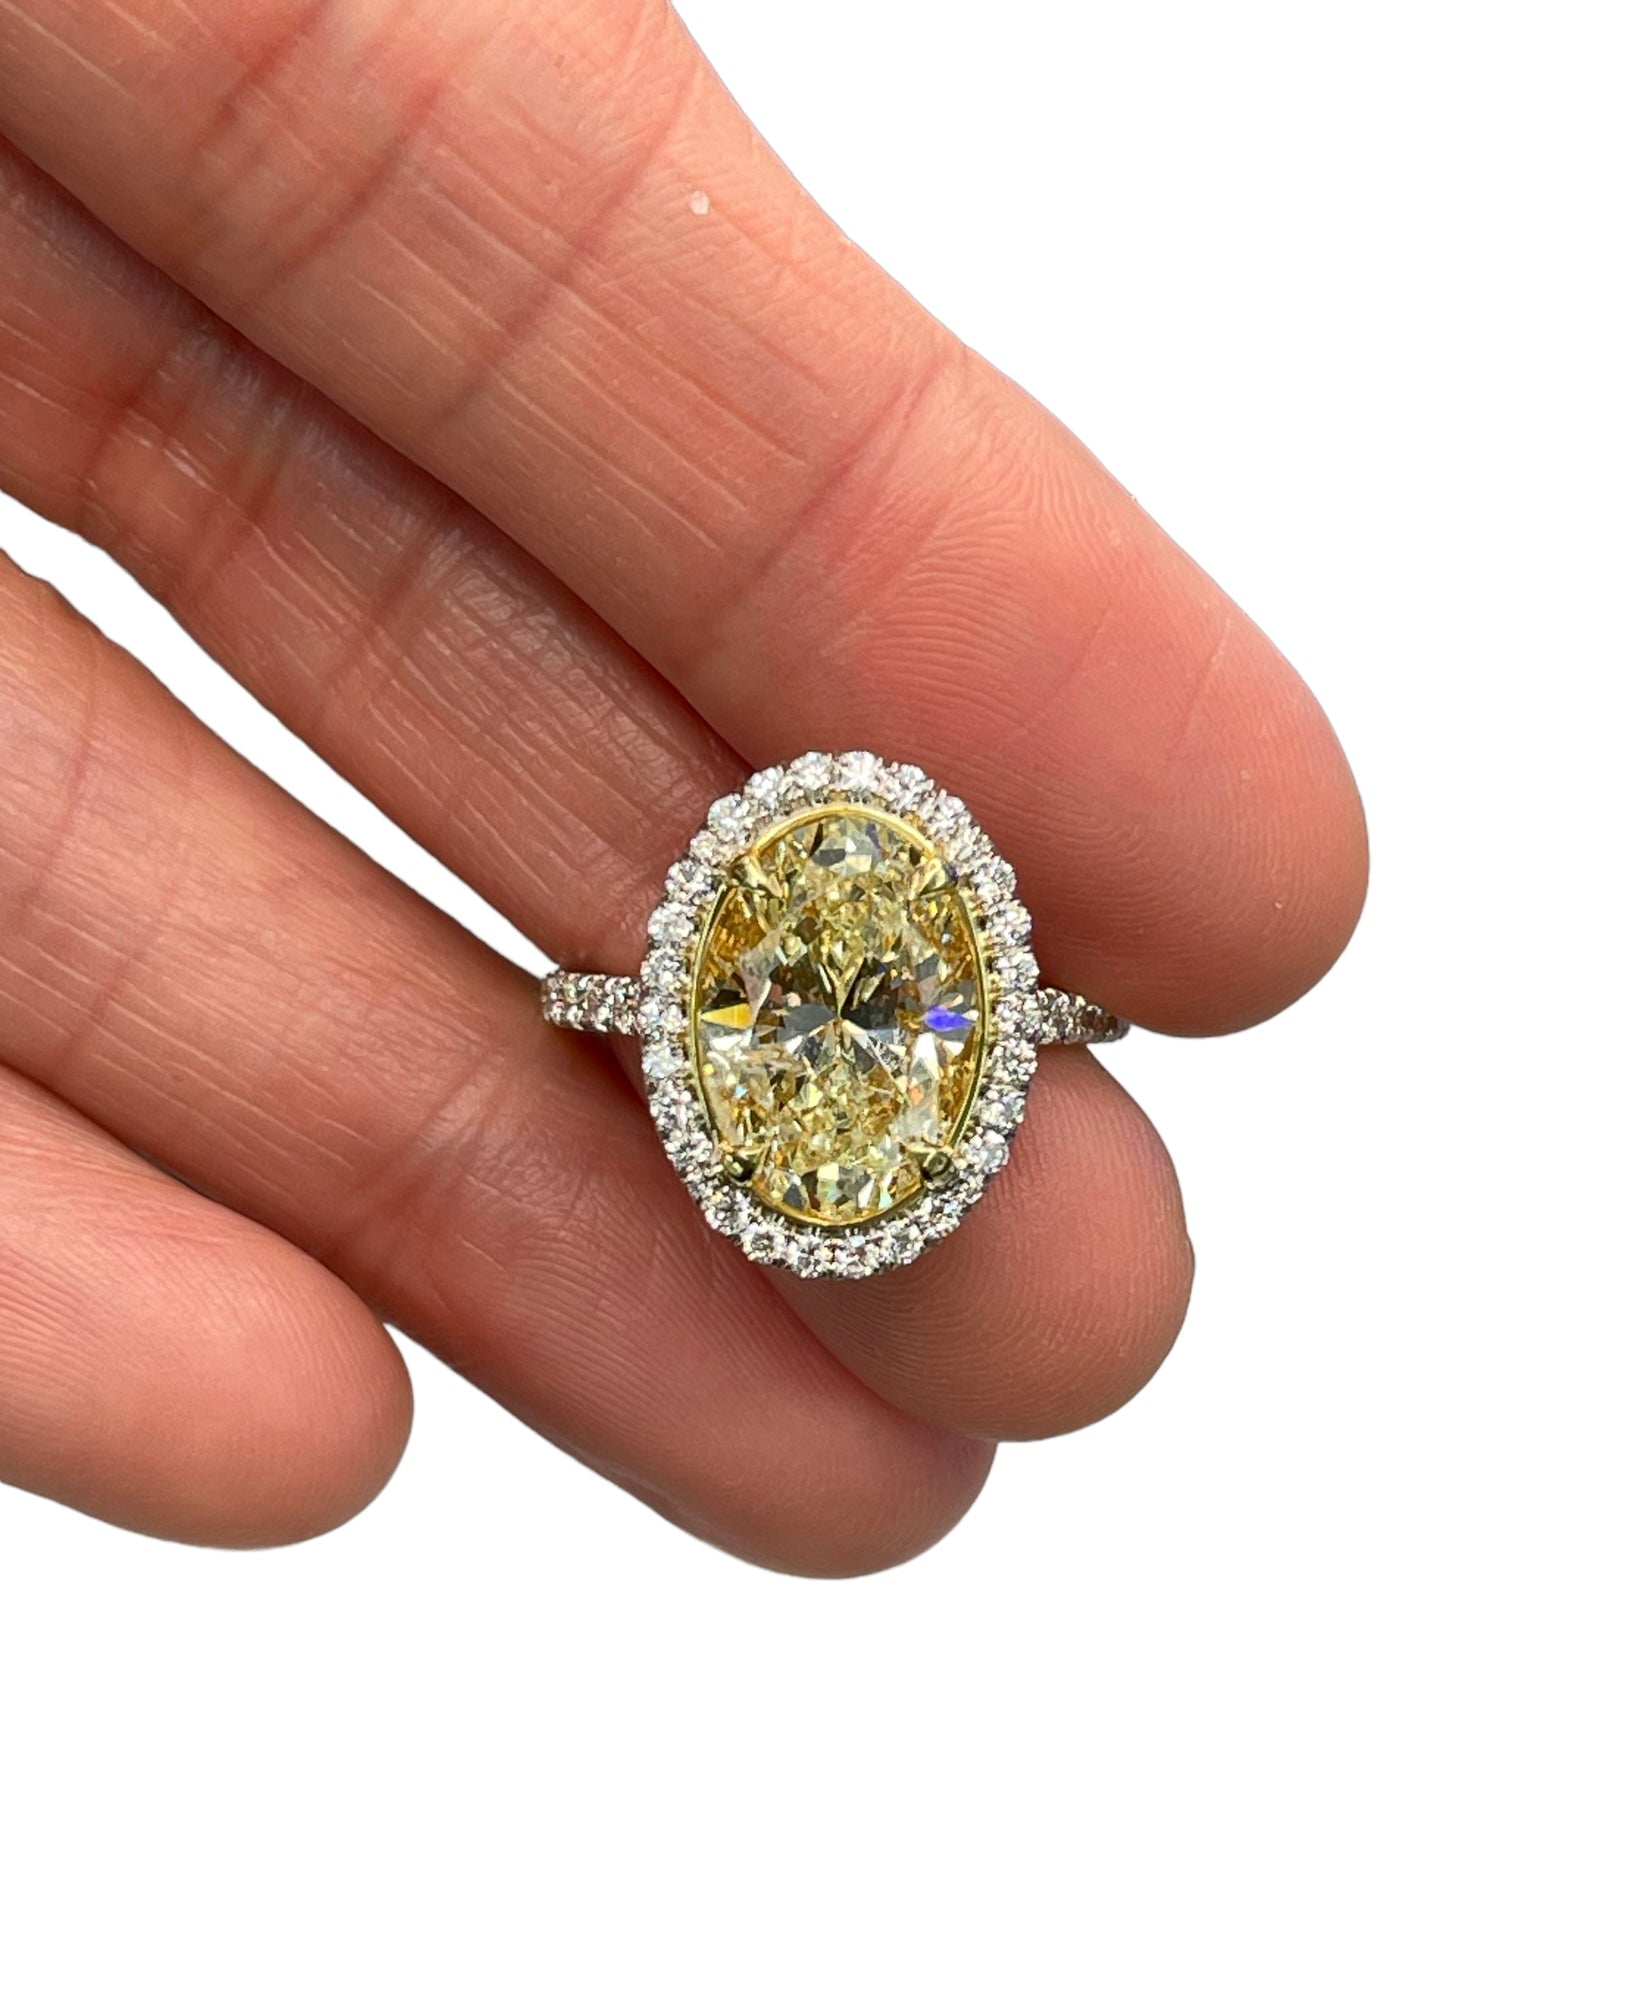 Certified Fancy Yellow Oval Diamond Engagement Ring 4.01 Carats